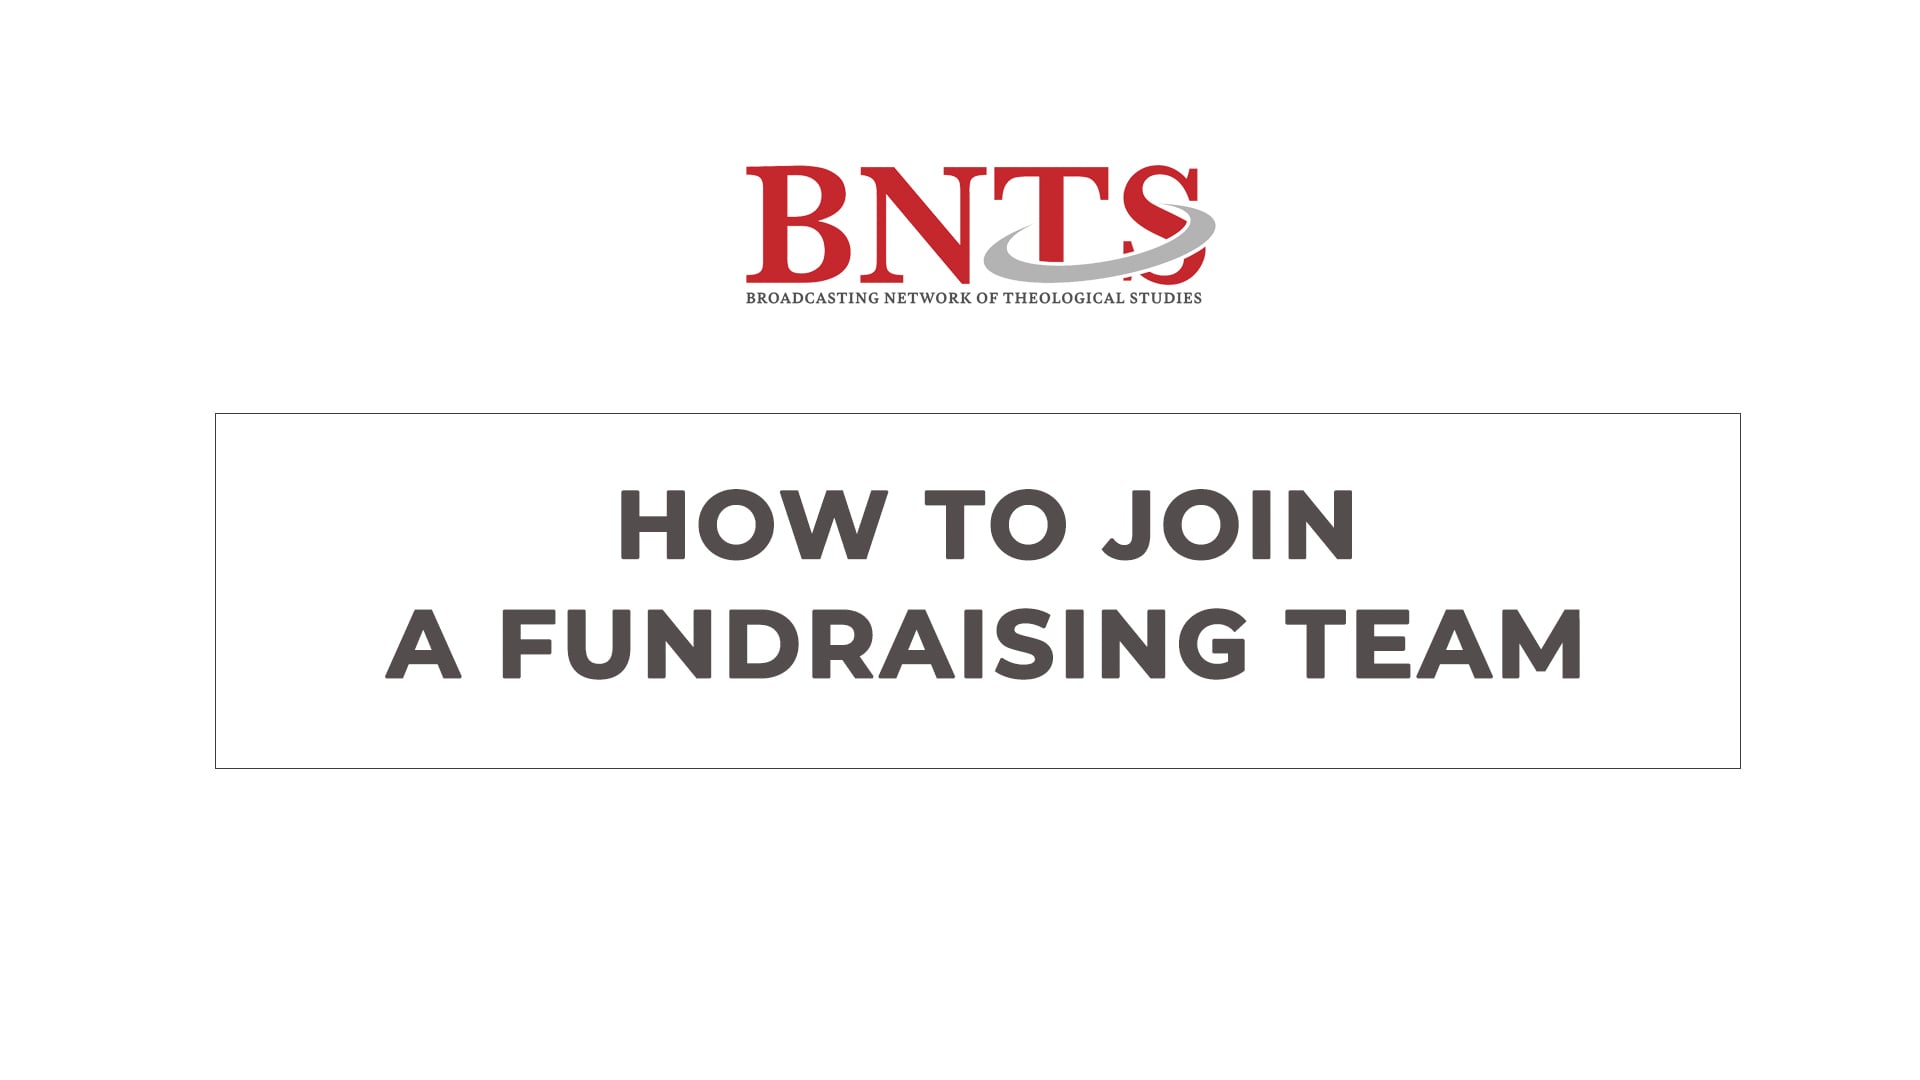 How-to-Join-Fundraising-Team